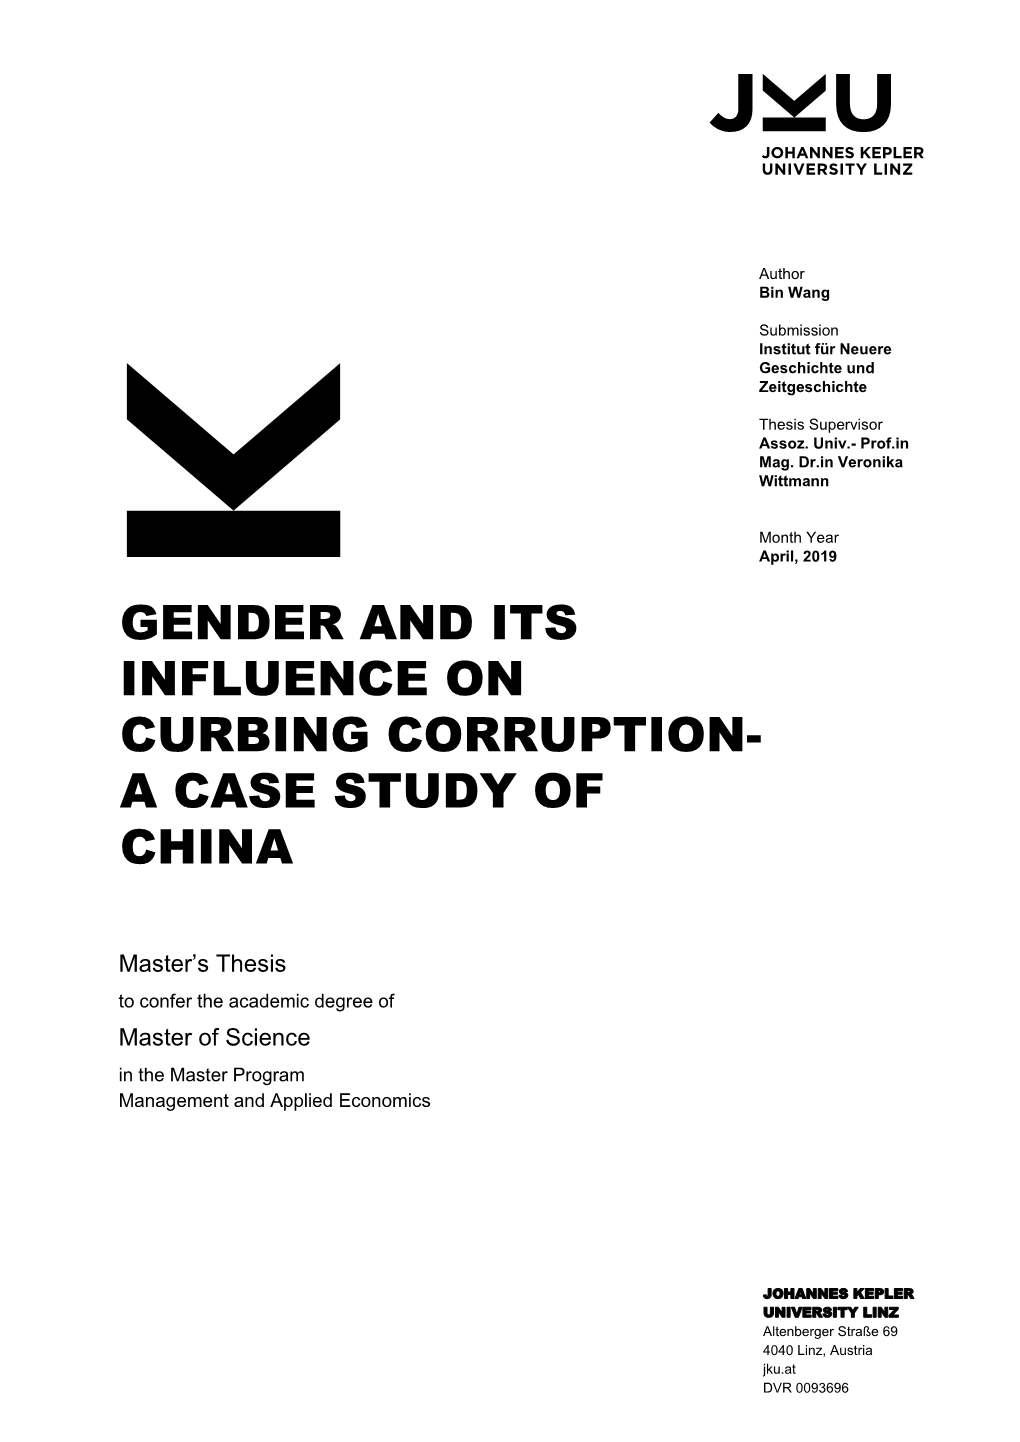 Gender and Its Influence on Curbing Corruption- a Case Study of China